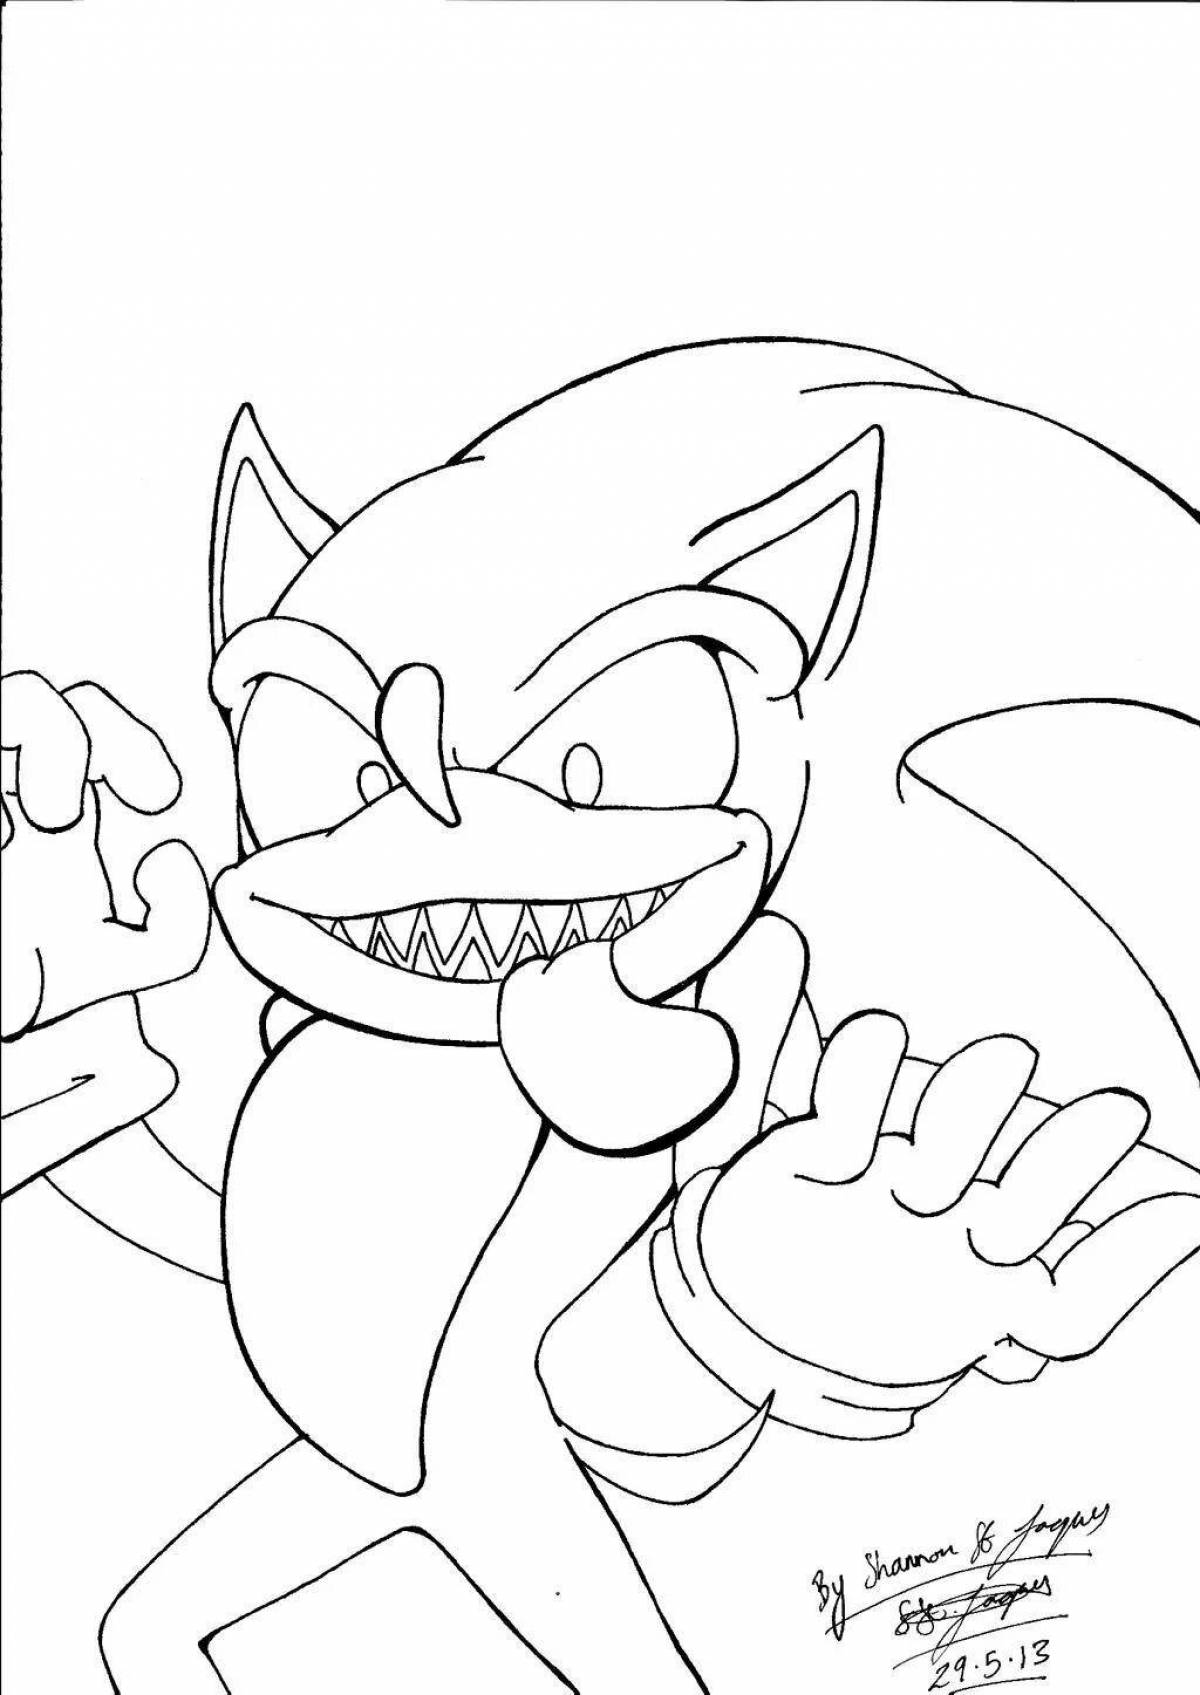 Exciting sonicexe coloring page